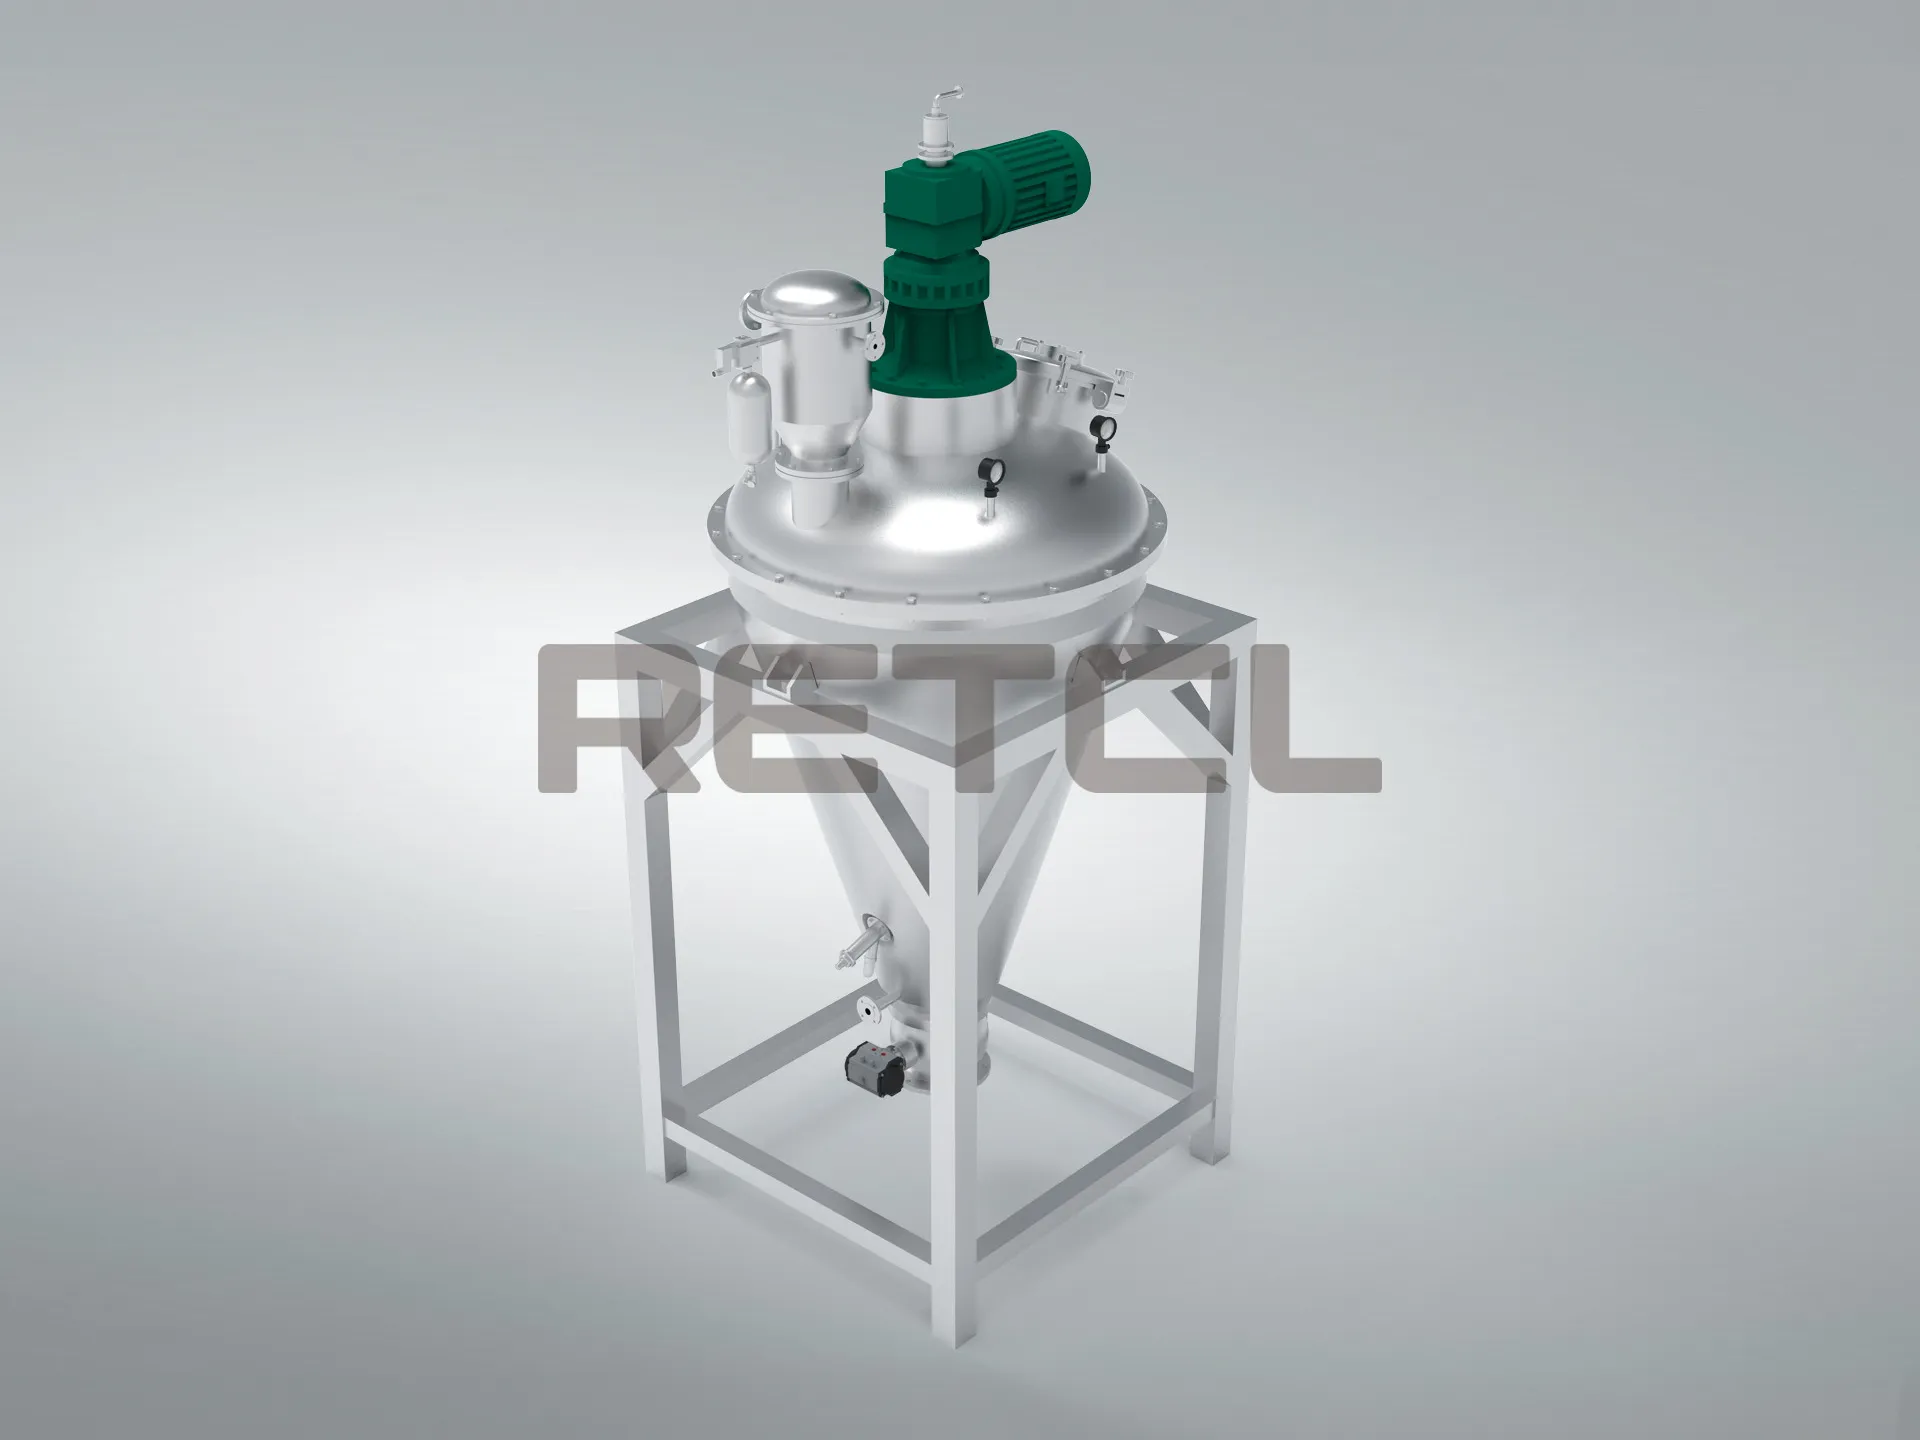 Conical Ribbon Screw Blender mixer for powder blending and mixing, consisting of stainless steel conical vessel on stand with green electric motor drive on top.